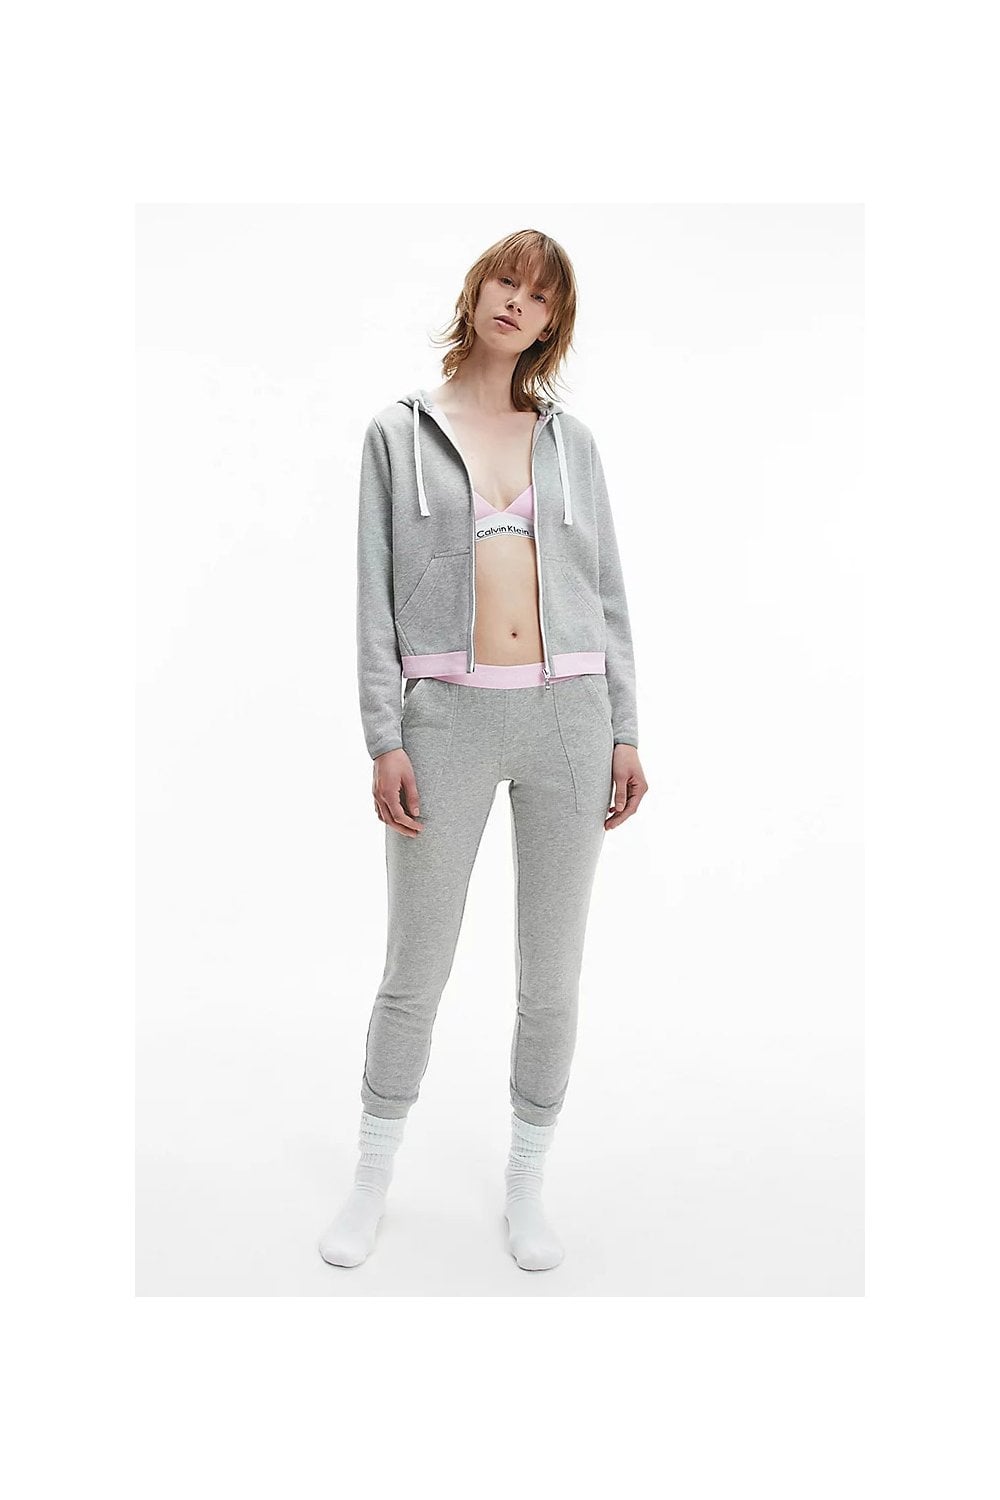 Calvin Klein Modern Cotton Lounge Zip Hoodie - Grey Heather/Pale Orchid –  Potters of Buxton